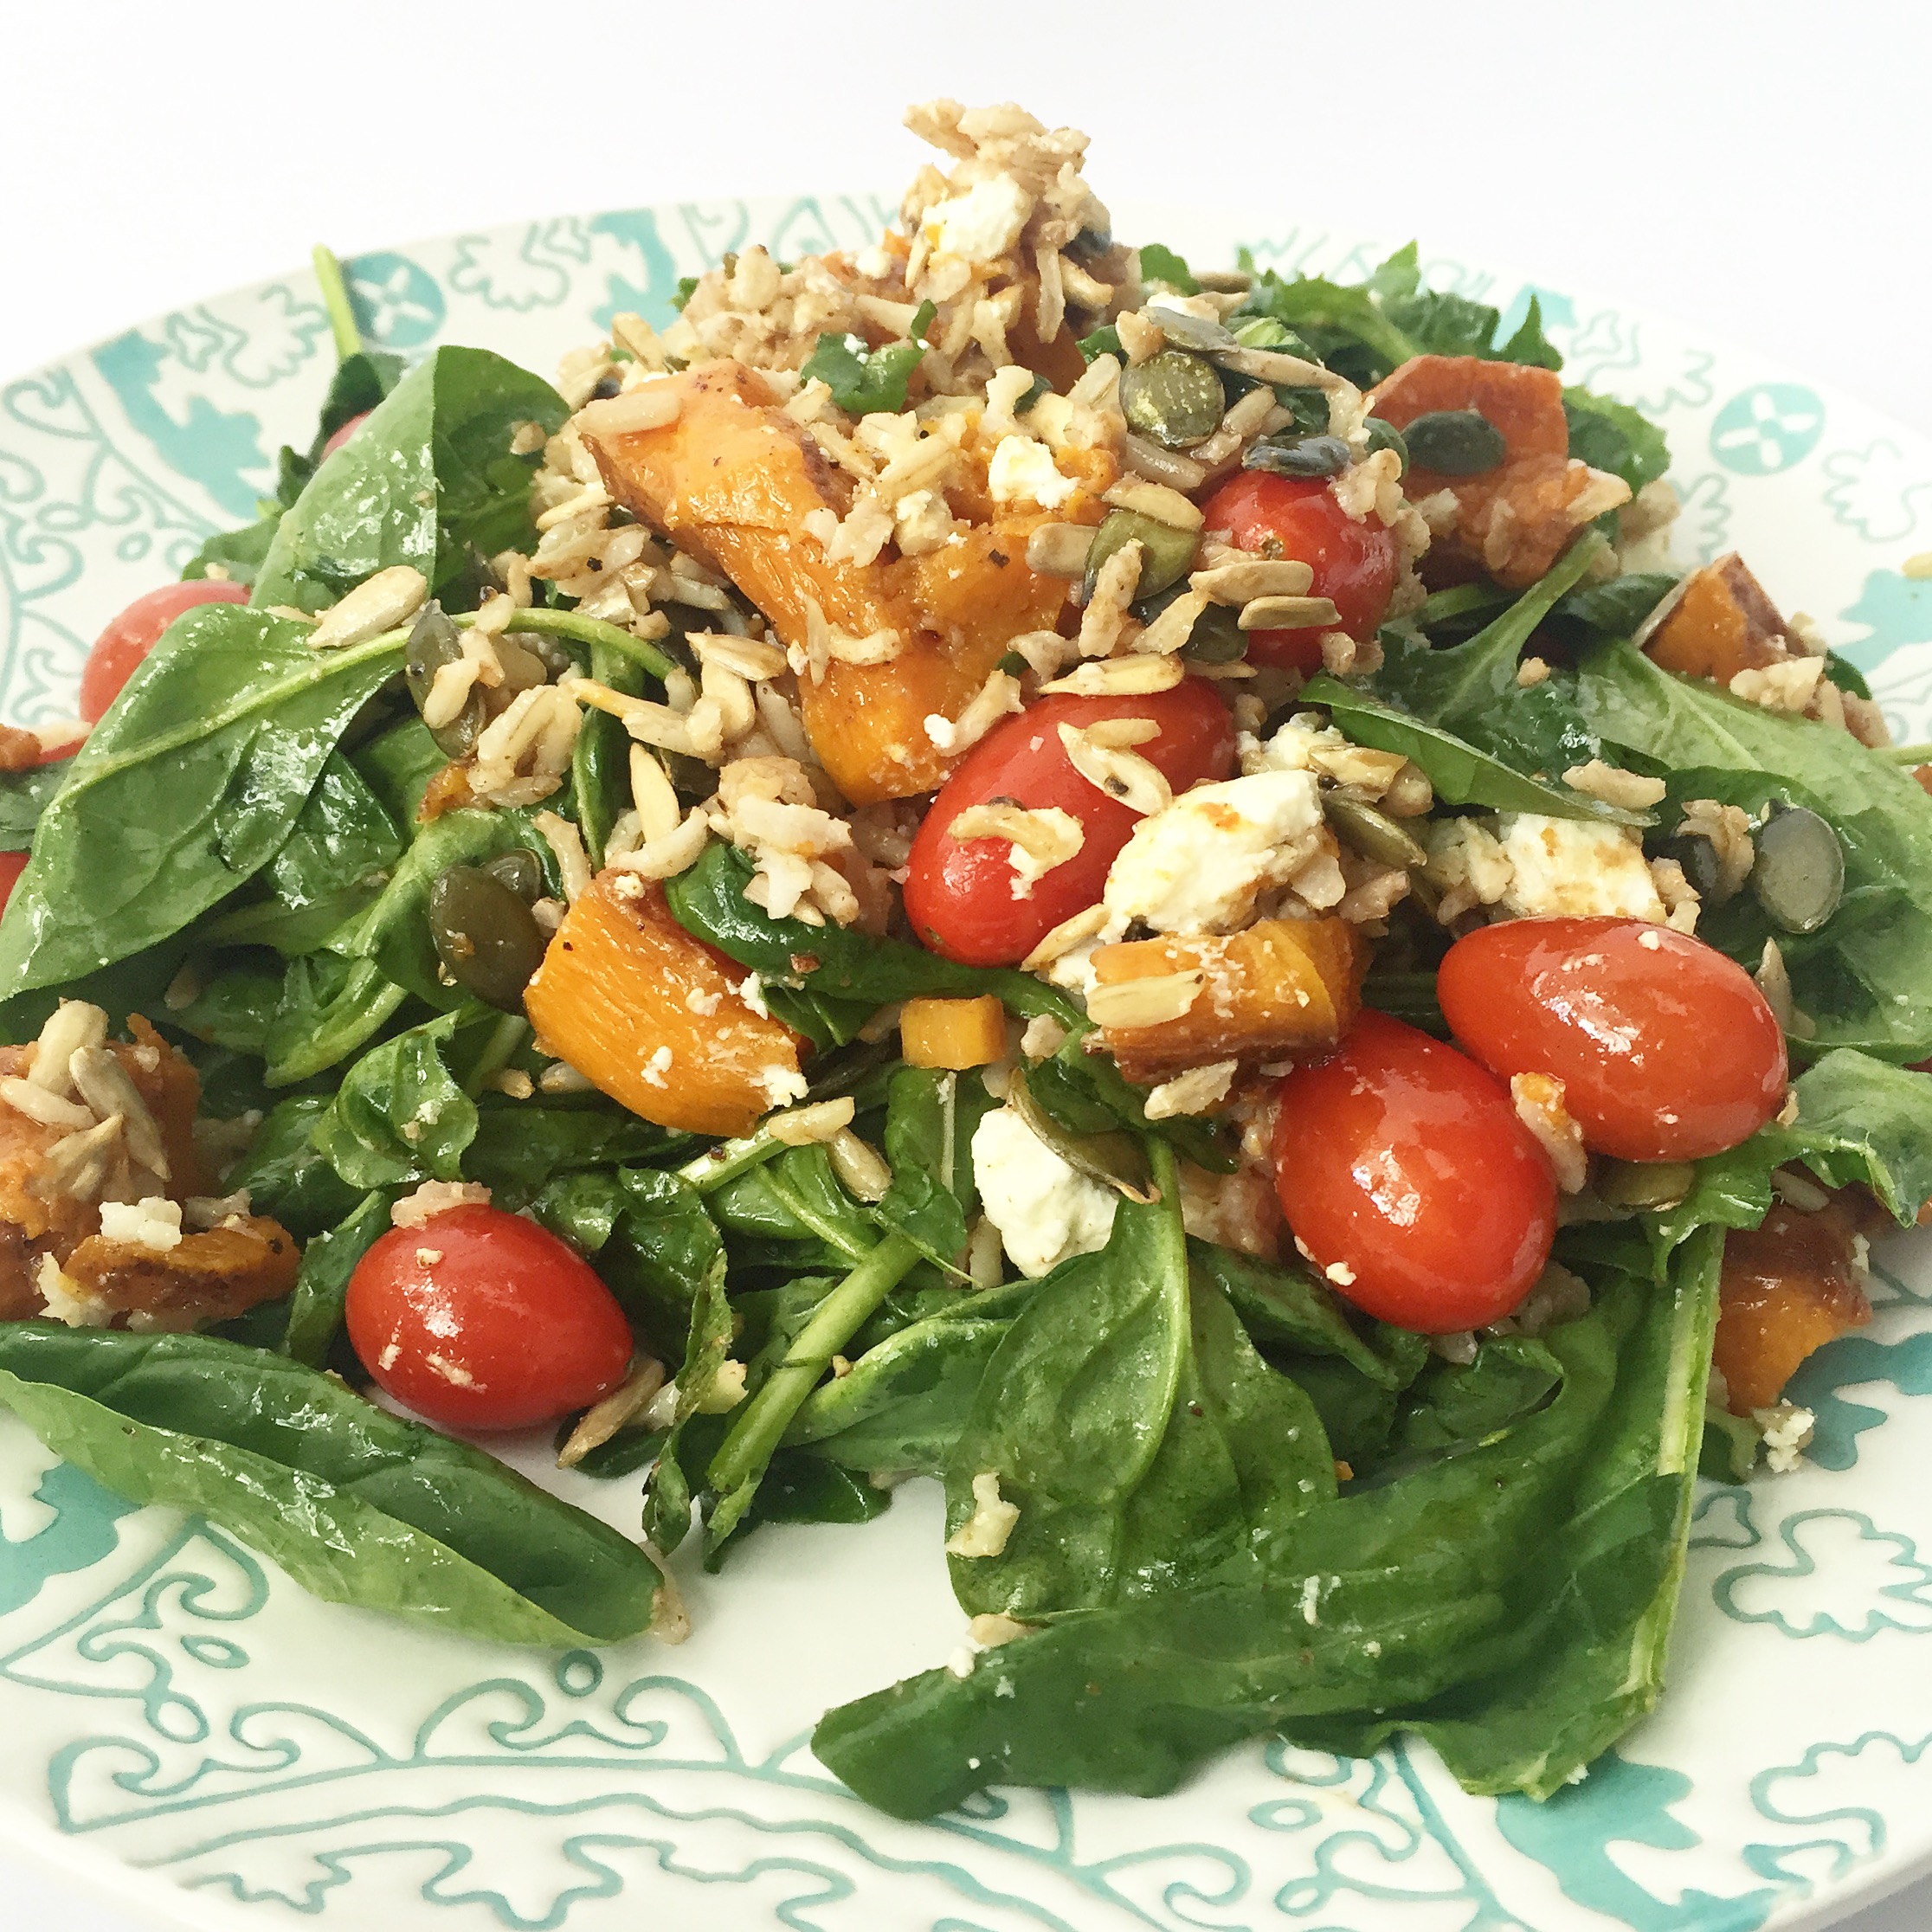 Roasted Butternut & Goat's Cheese Salad